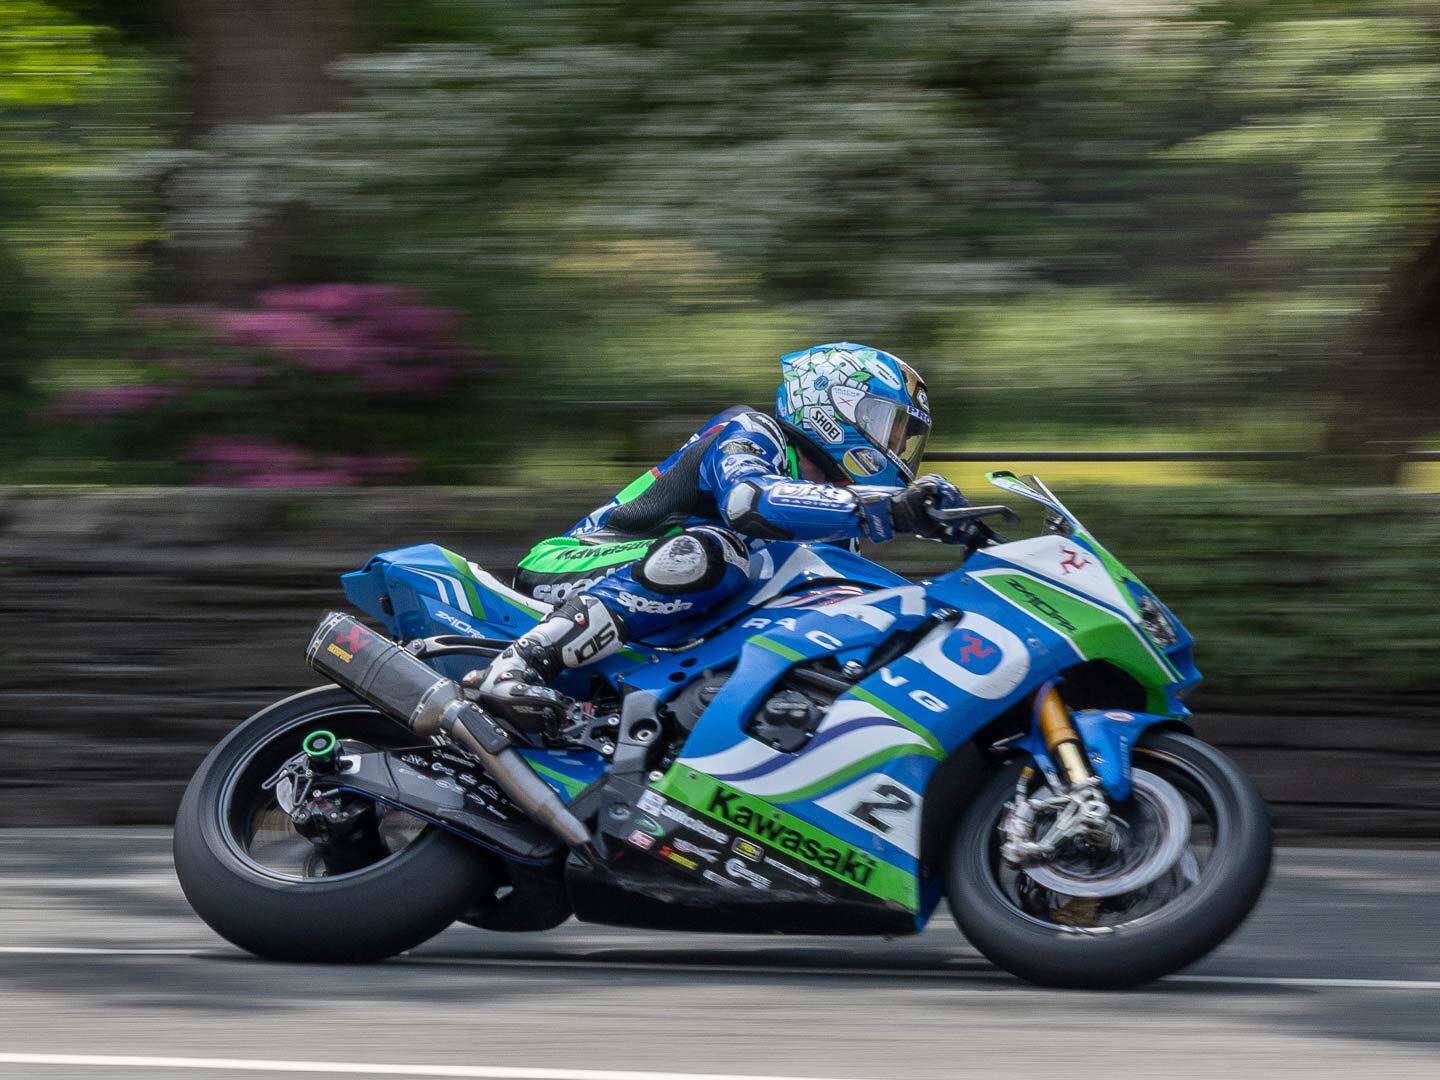 Always competitive, former TT Senior Superbike winner Dean Harrison rides his Kawasaki Ninja ZX-10RR Superbike close to the wall at Greeba Bridge. Harrison finished second to Hickman, 20 seconds back after six laps and two pit stops of the 37.73-mile course.